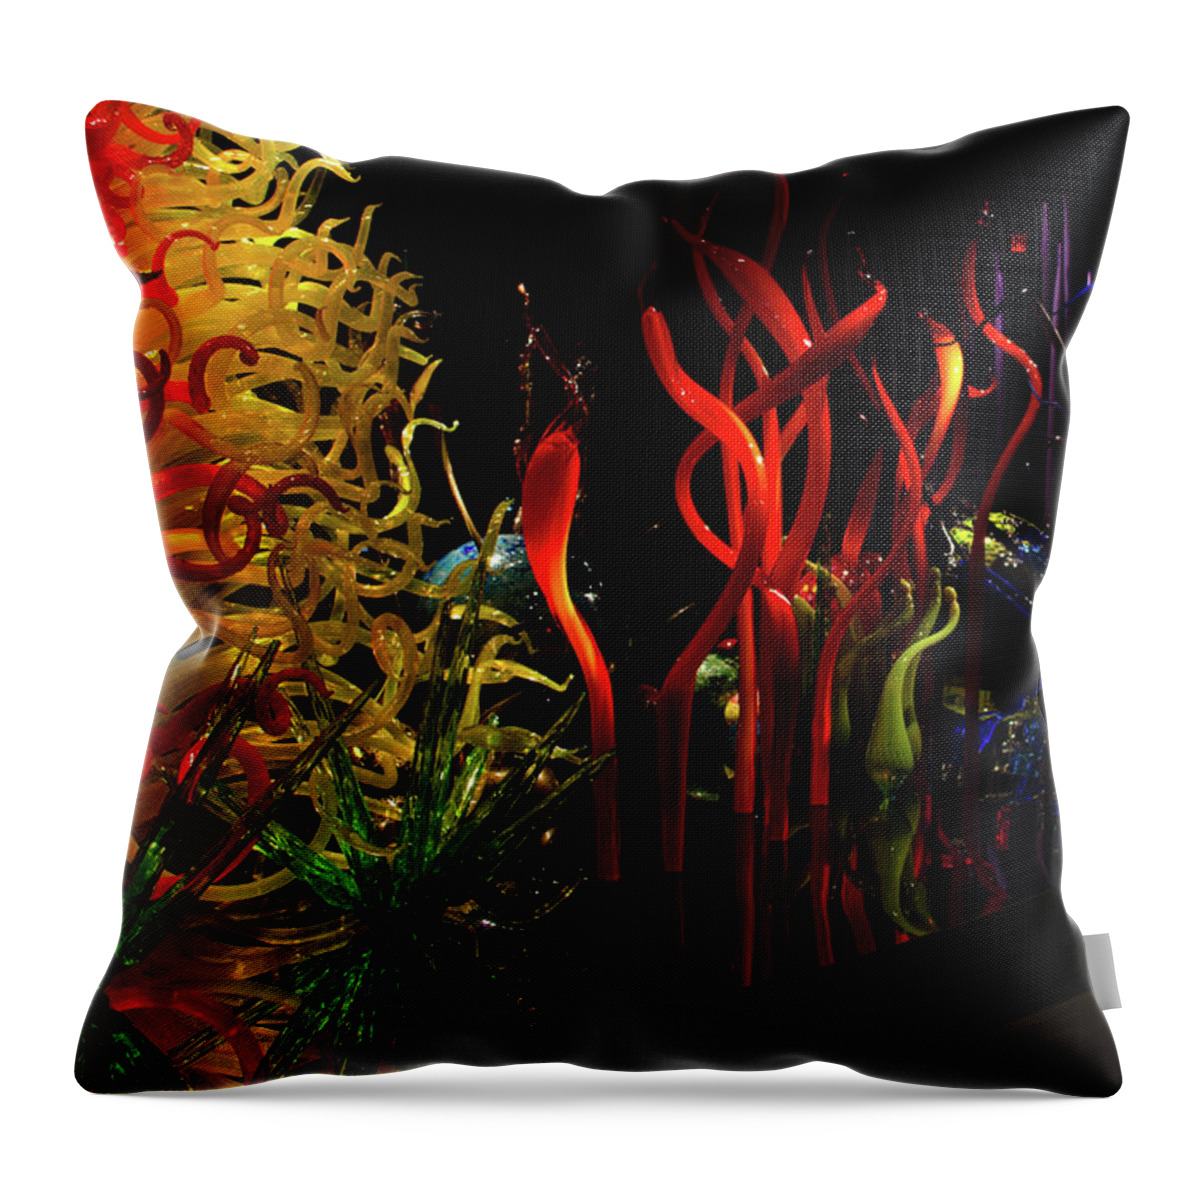 Blownglass Throw Pillow featuring the photograph Chihuly Glass No.2 by Vicky Edgerly